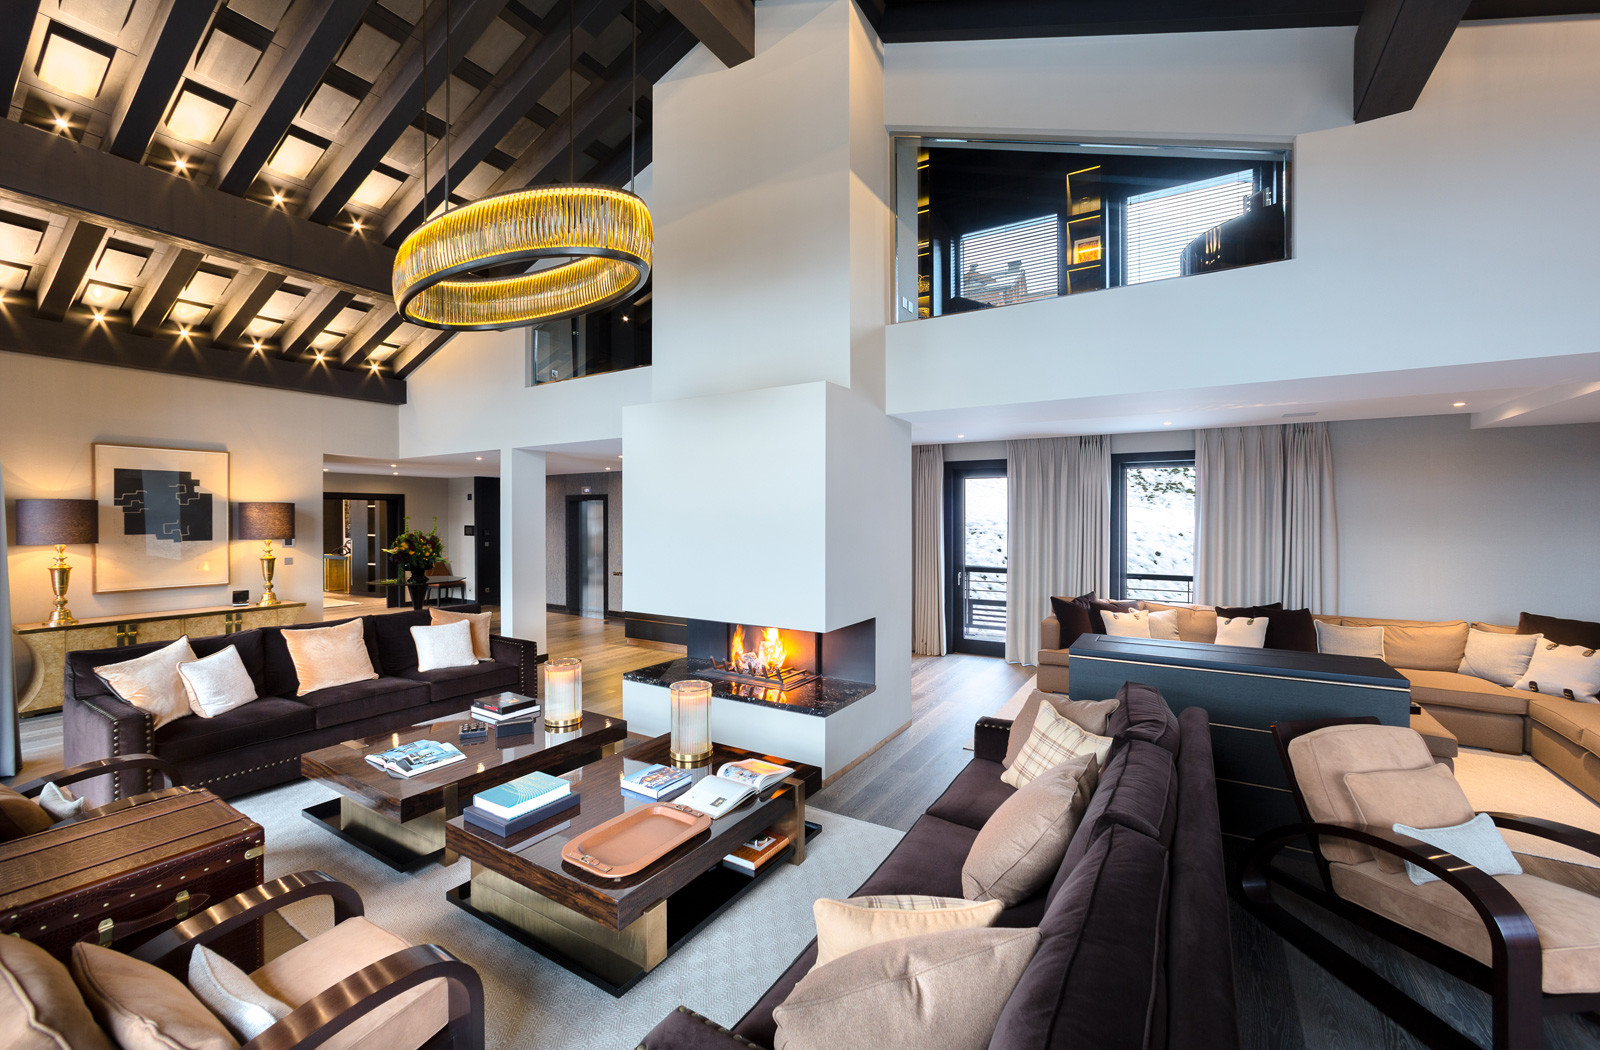 Kings-avenue-courchevel-sauna-jacuzzi-hammam-swimming-pool-childfriendly-parking-boot-heaters-fireplace-cinema-room-bar-night-club-lift-area-courchevel-012